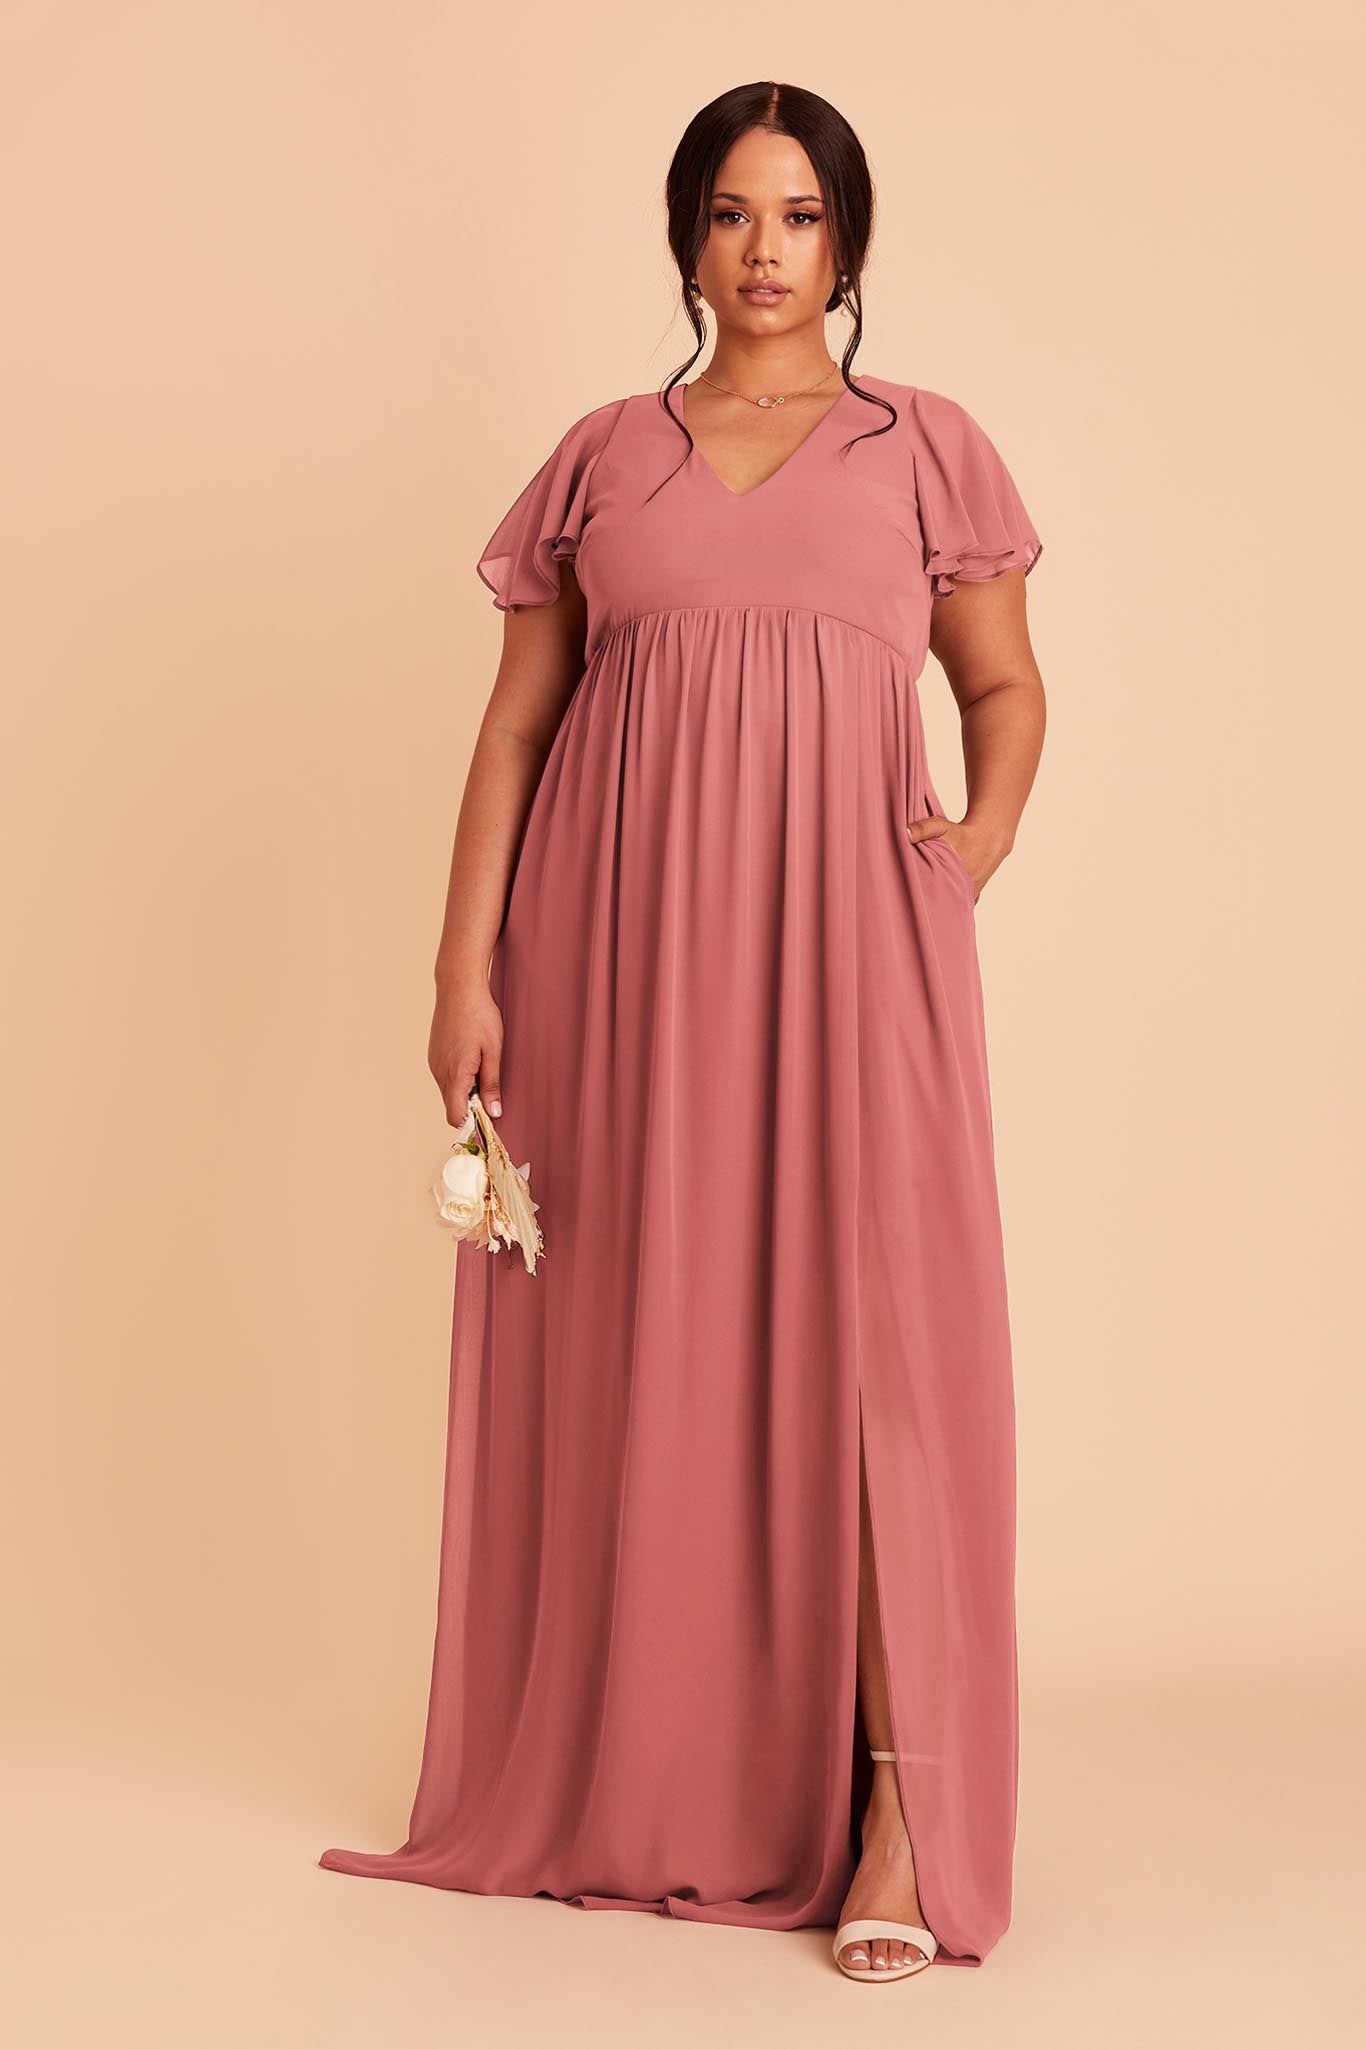 Mulberry Hannah Empire Dress by Birdy Grey